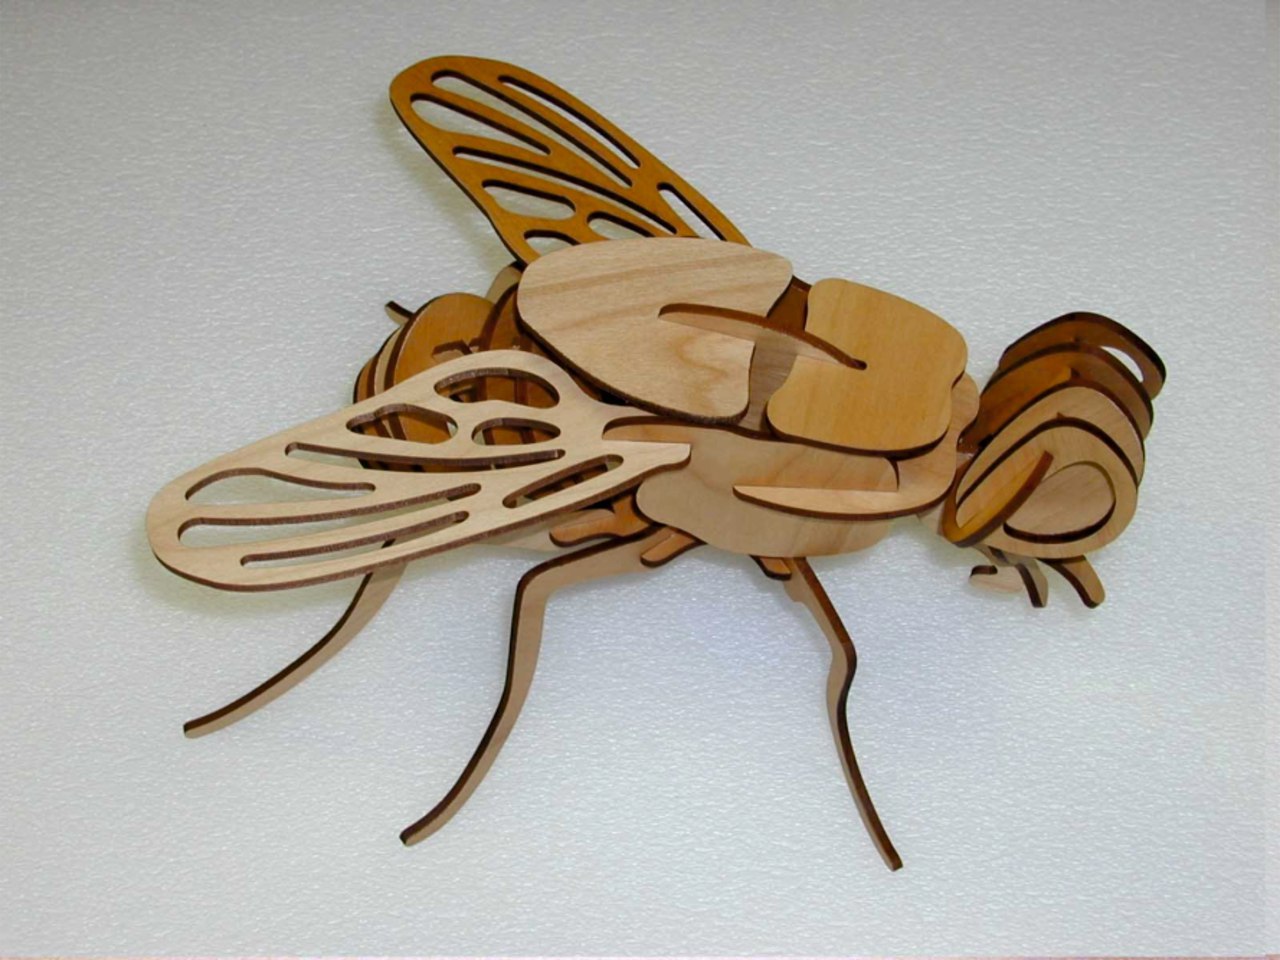 Laser Cut Wooden Fly 3D Puzzle Model Template Free Vector